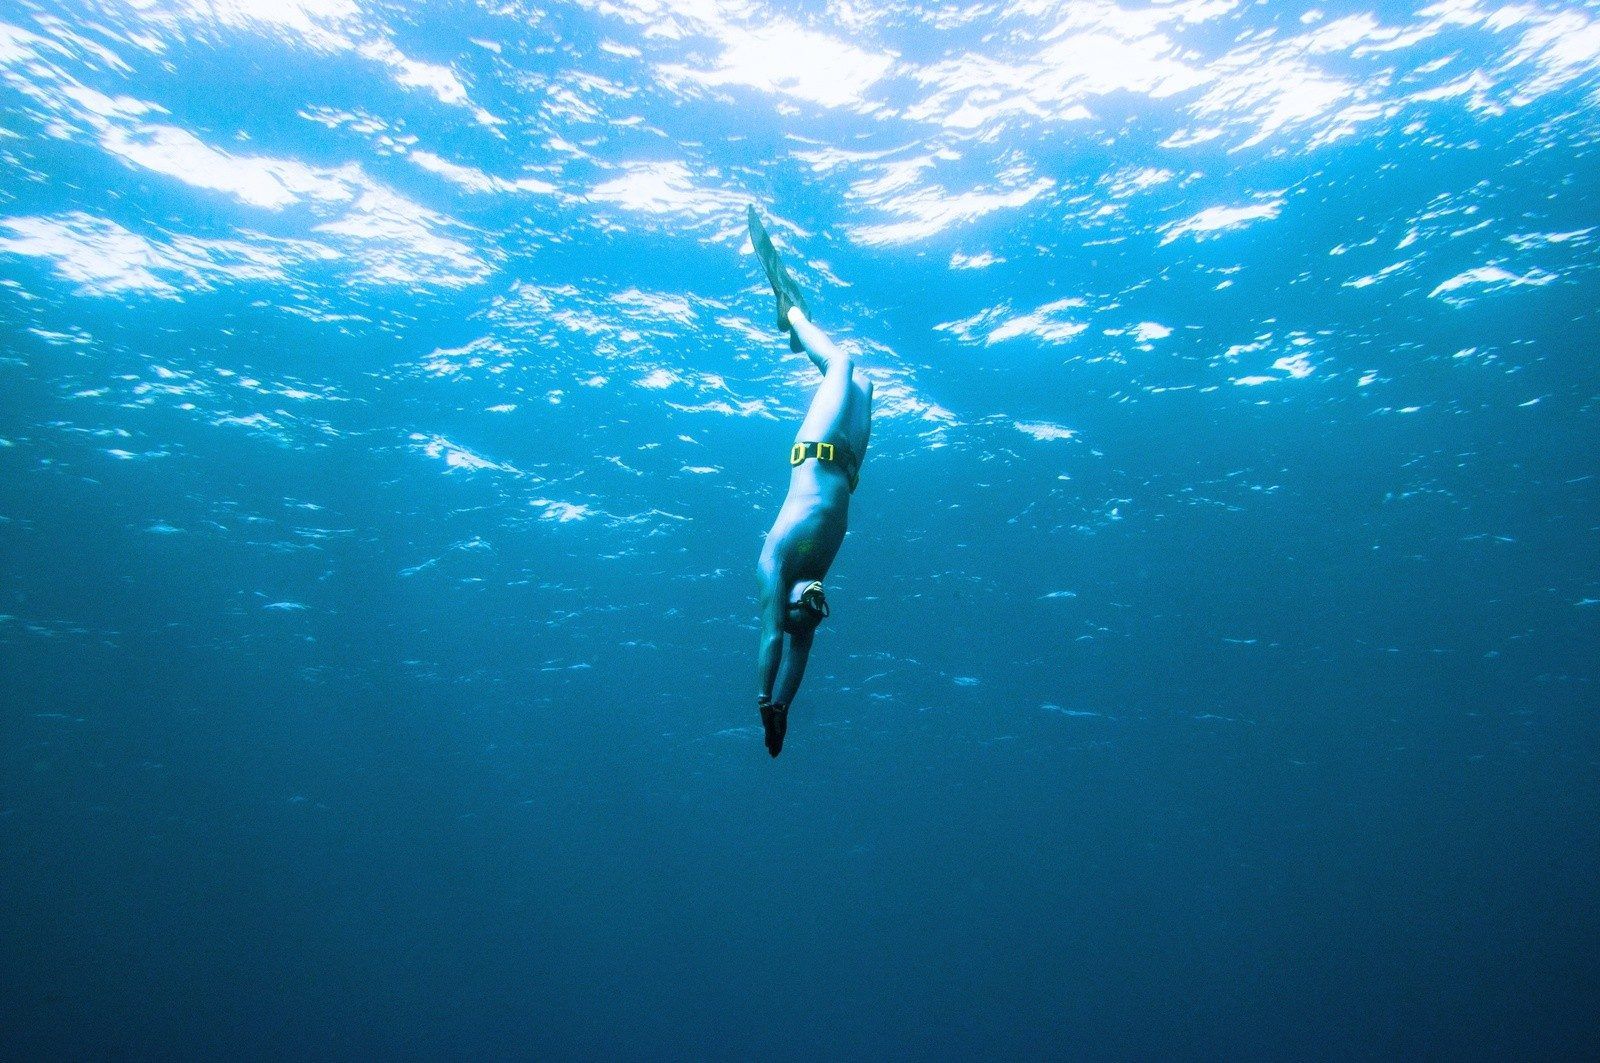 Learning How to Freedive in the Canary Islands